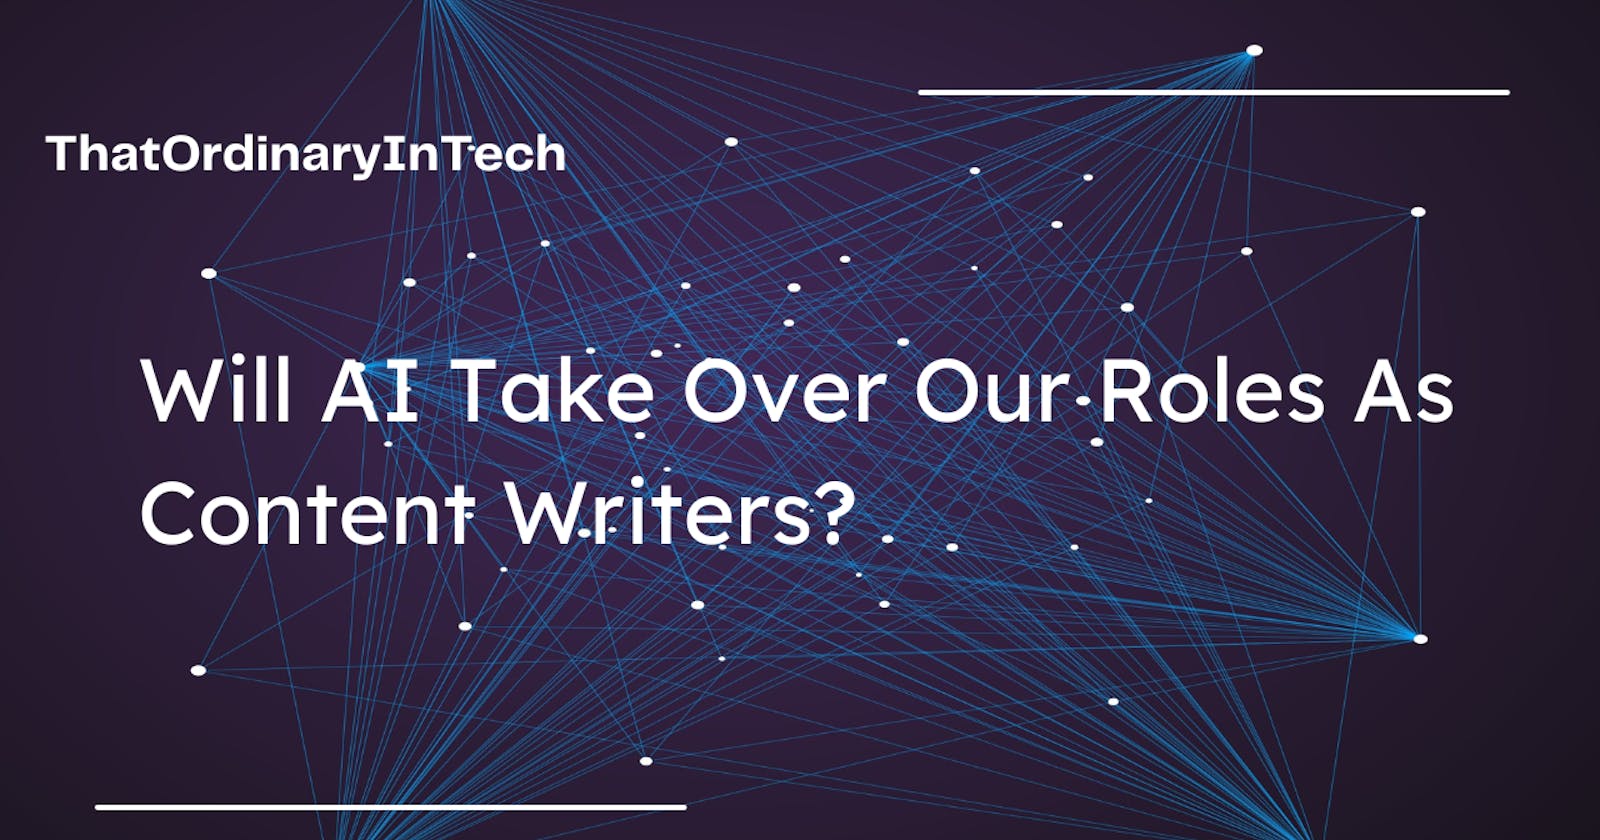 Will AI Take Over Our Roles As Content Writers?